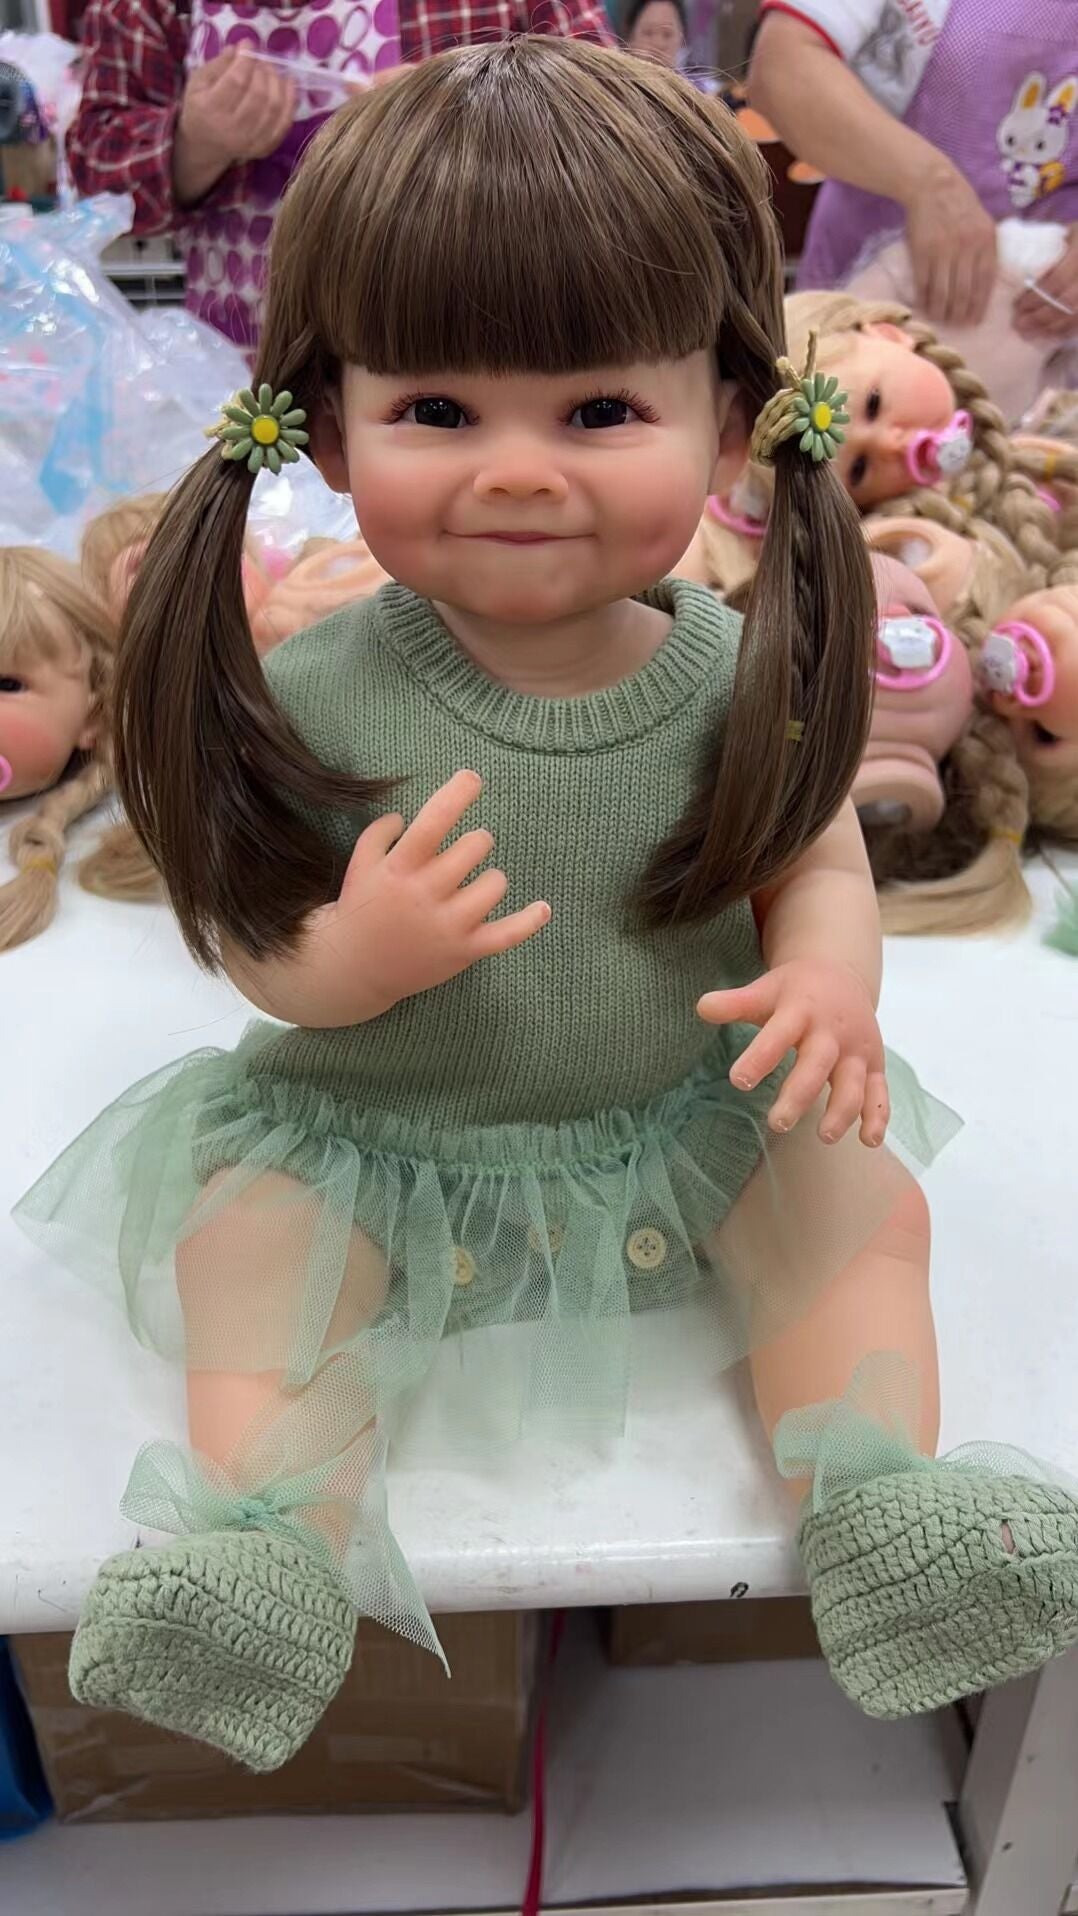 Lifelike Reborn Baby Dolls Full Body Silicone Girl 22 Inch Realistic Baby Dolls Toddler Princess Girls 55CM Real Newborn Babies Size Soft Touch Adorable Toys Gift For 3+ Year Old Kids